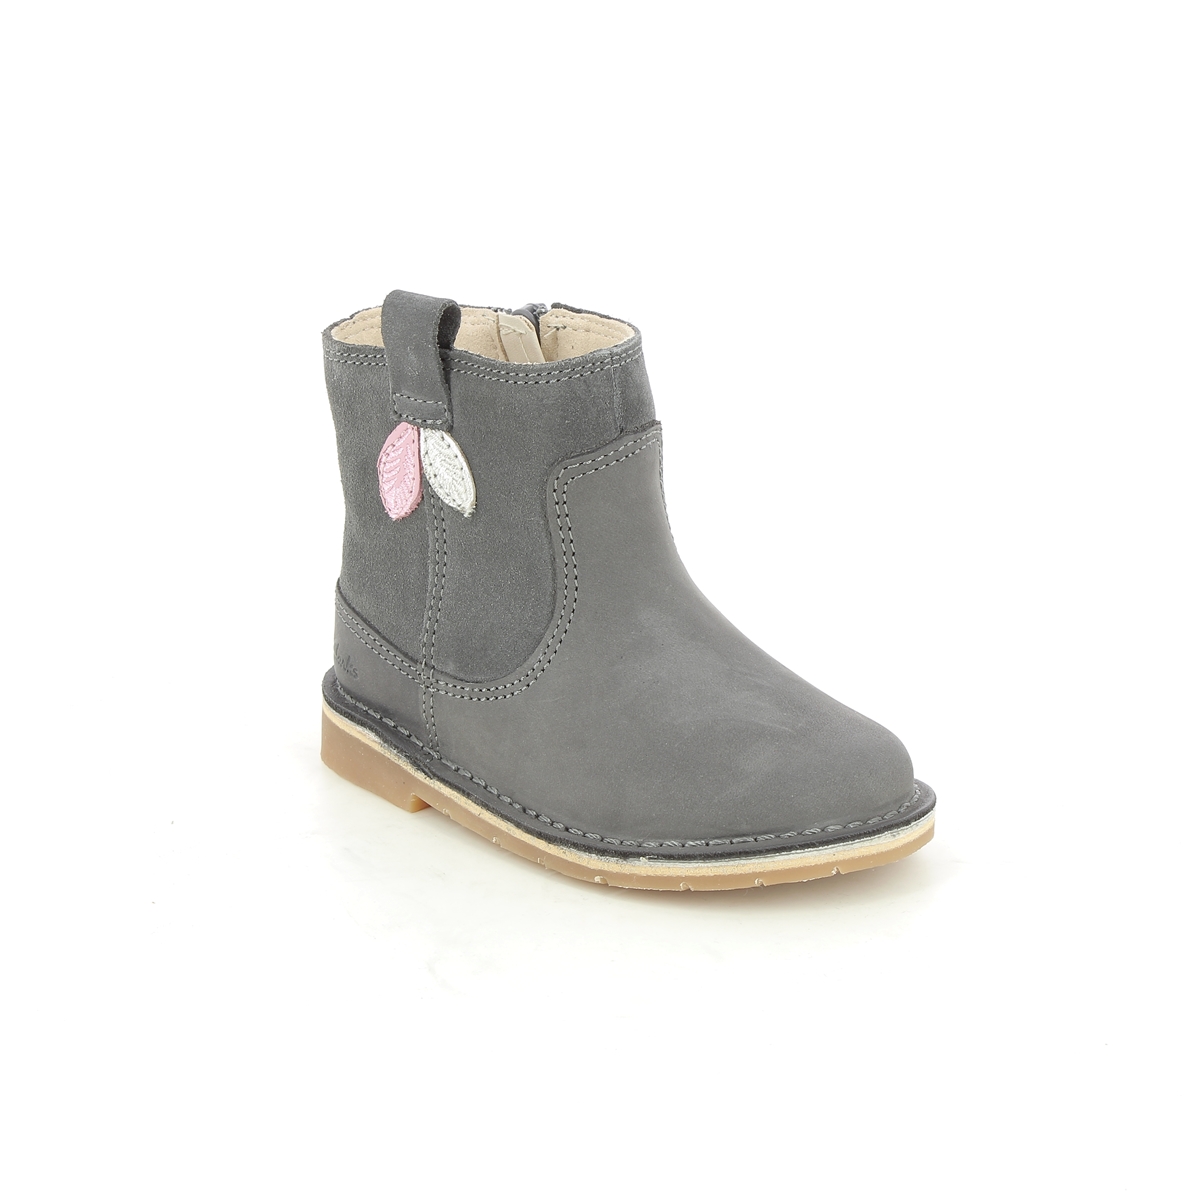 Clarks Comet Style T Grey Leather Kids Toddler Girls Boots 619426F In Size 6.5 In Plain Grey Leather F Width Fitting Regular Fit For kids